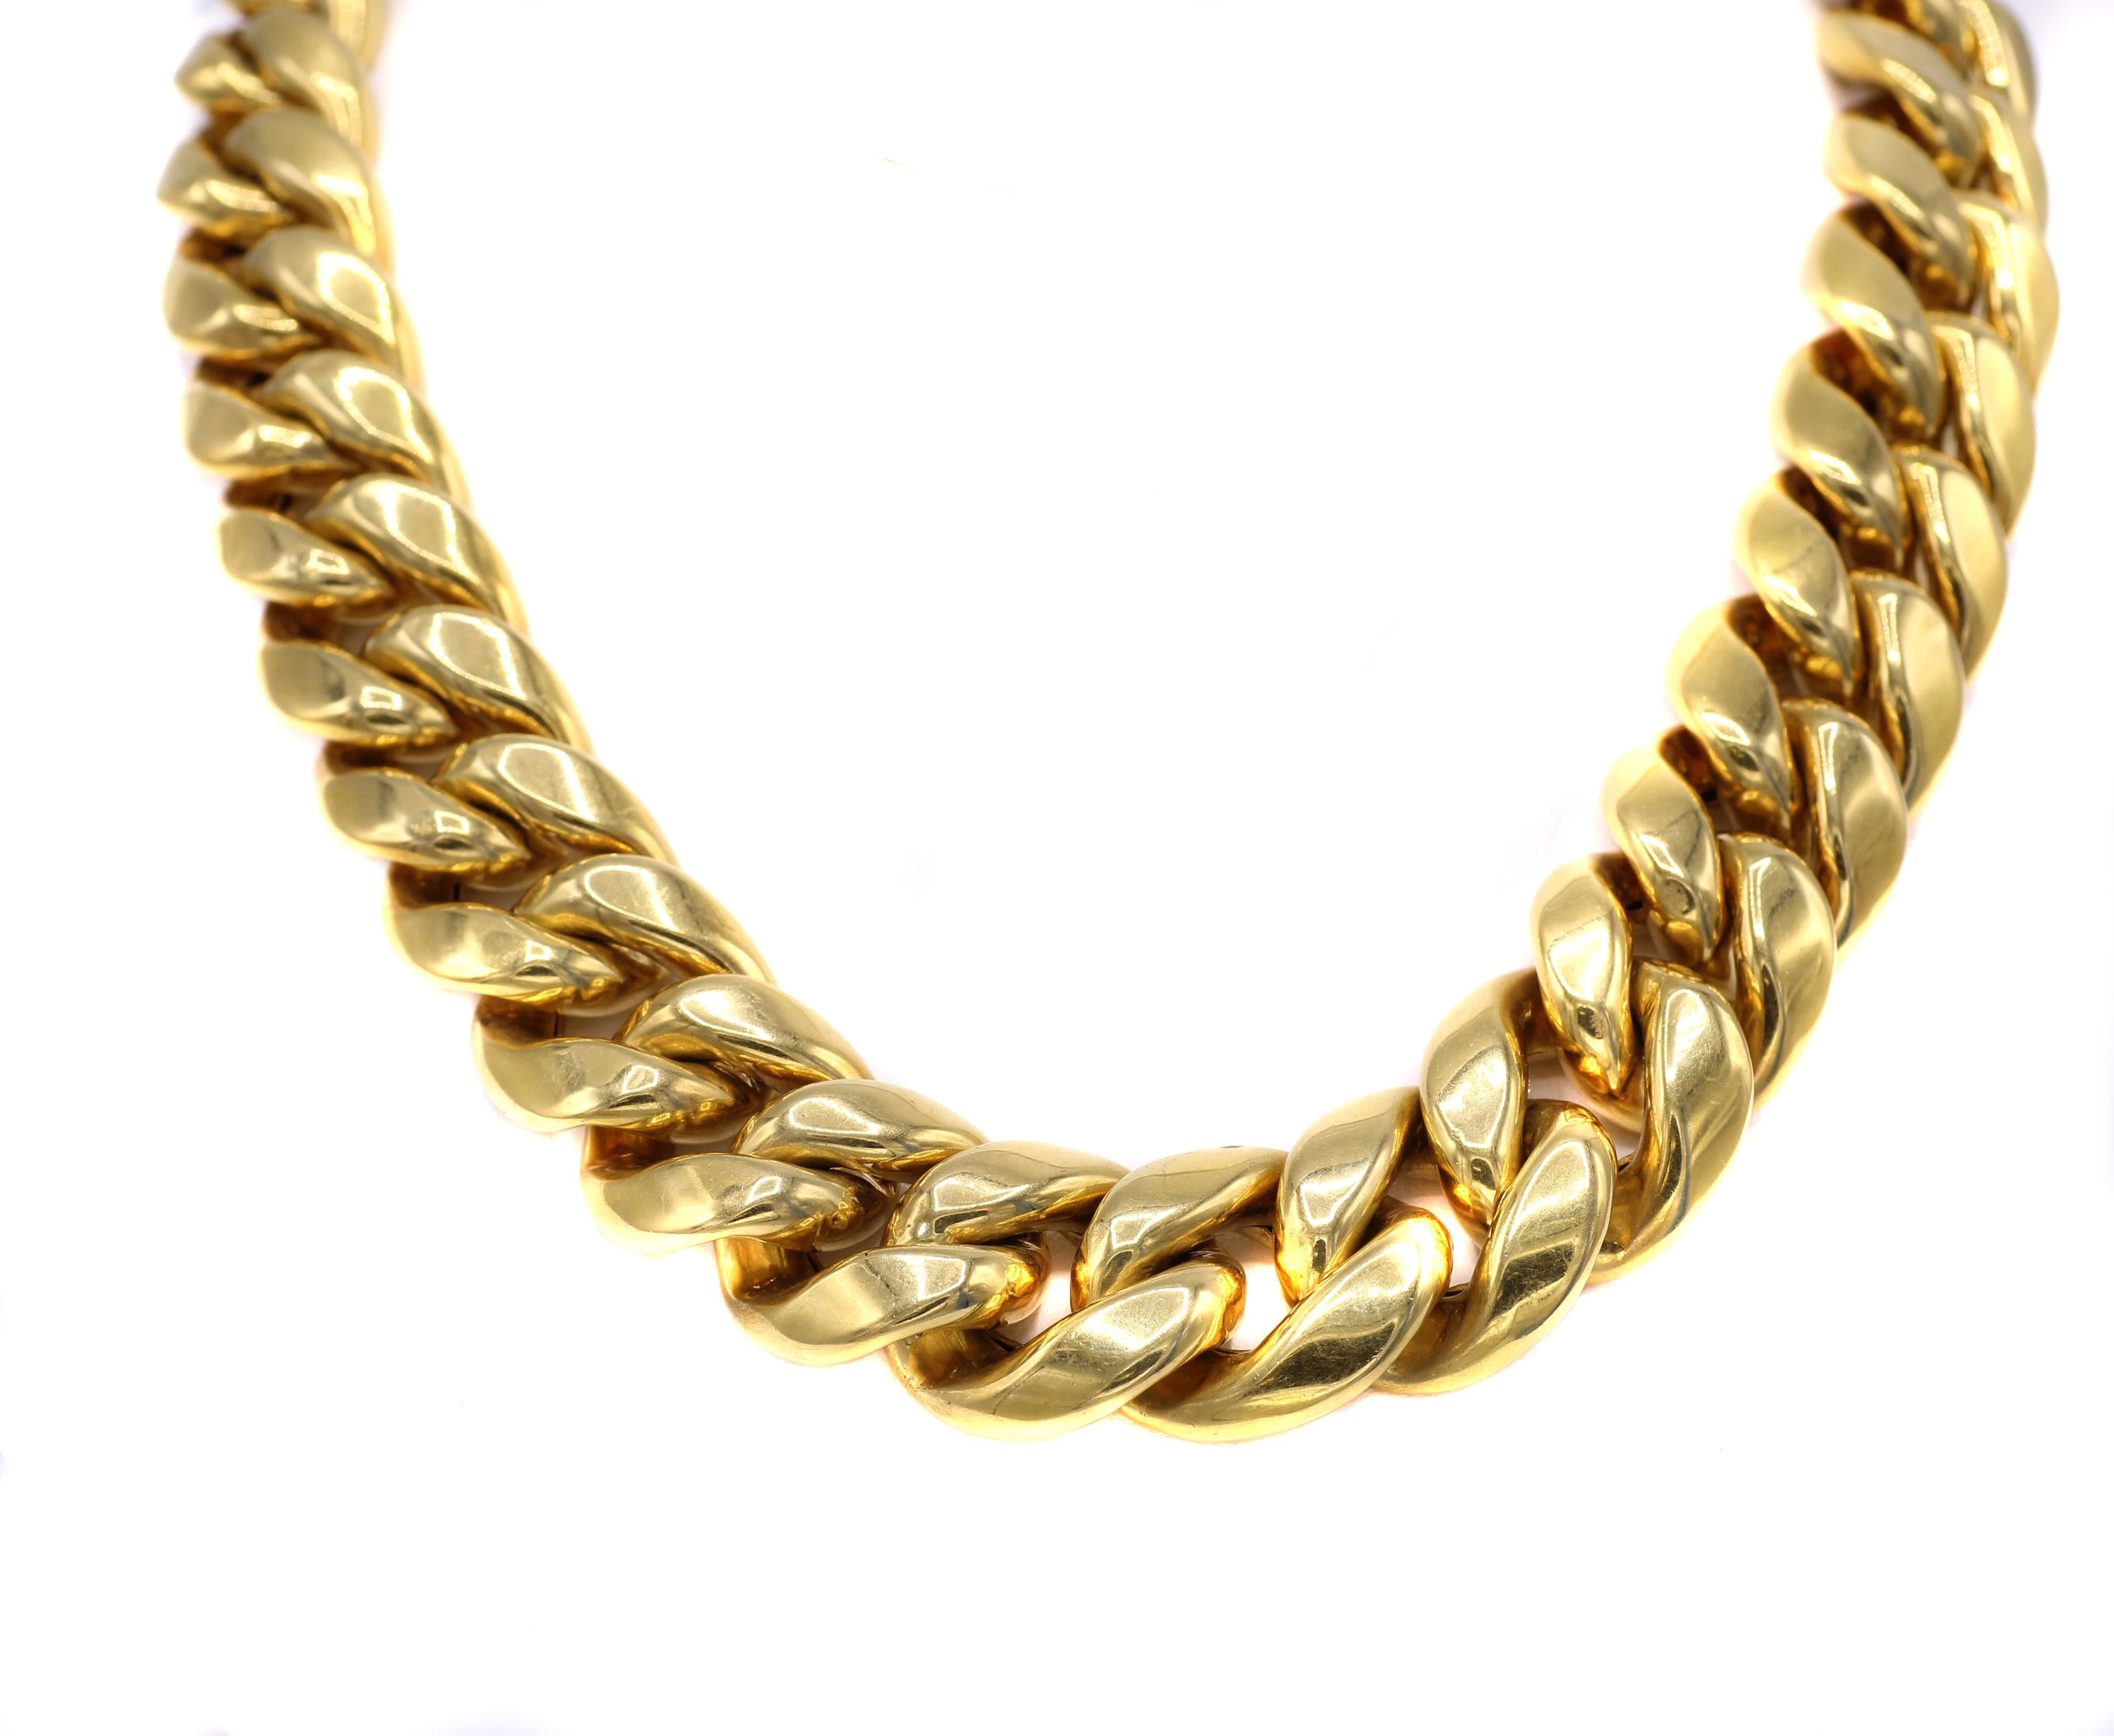 Fashionable chic Italian 1980s 18 karat yellow gold curb link choker necklace with a minimal graduation of width ranging from 0.75 inches in the center to 0.6 inches at the ends. The hollow gold links make this necklace not too heavy on the neck